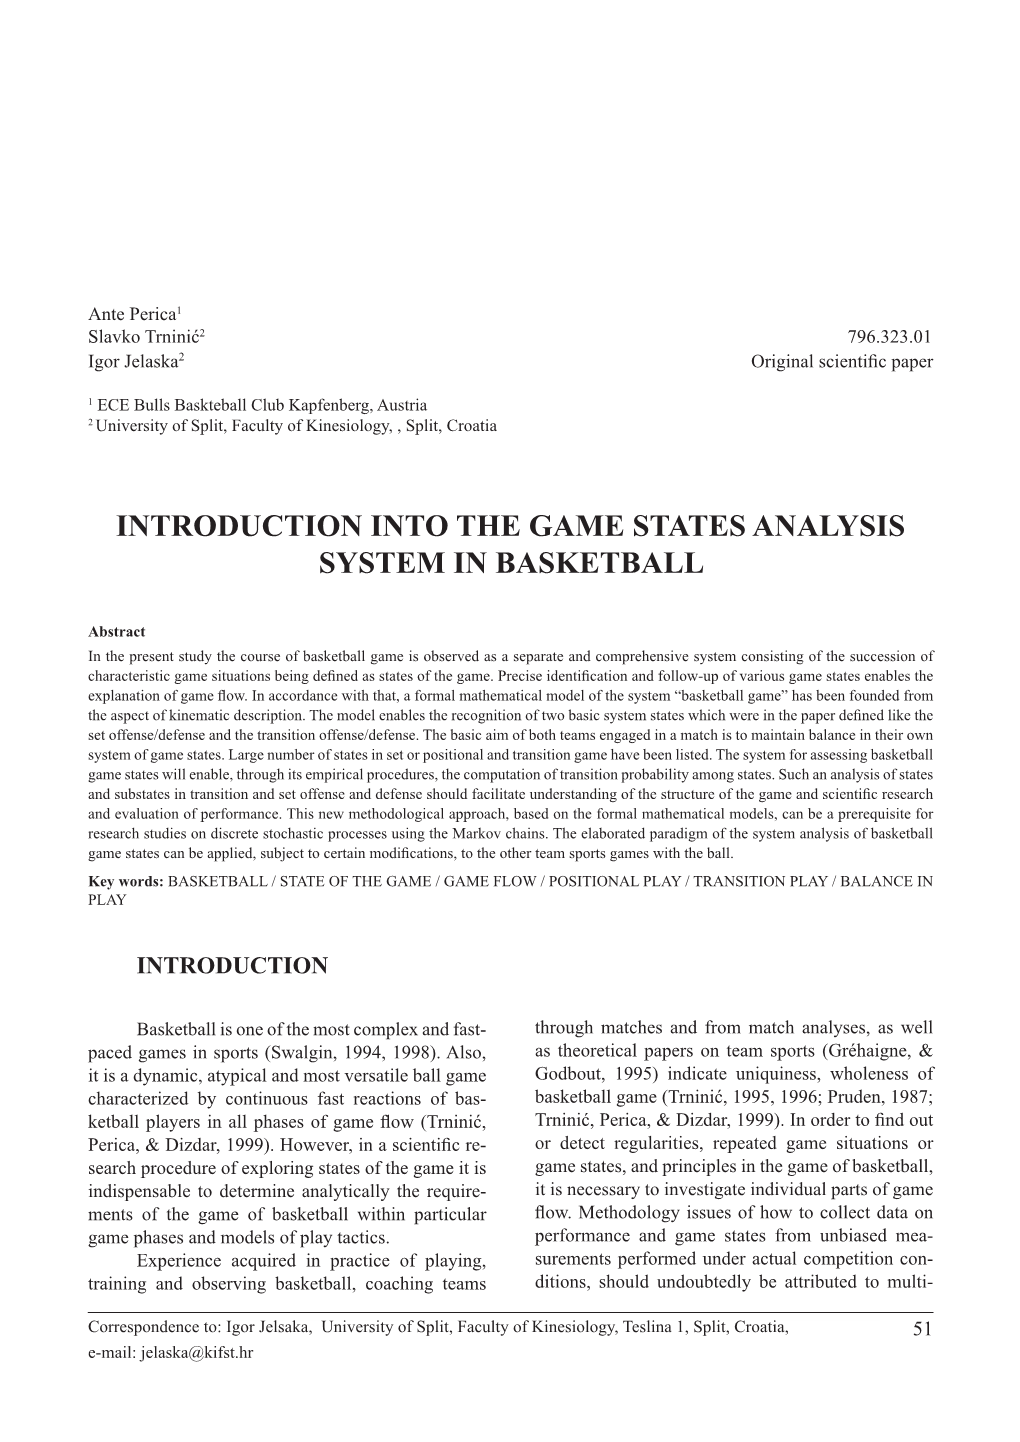 Introduction Into the Game States Analysis System in Basketball